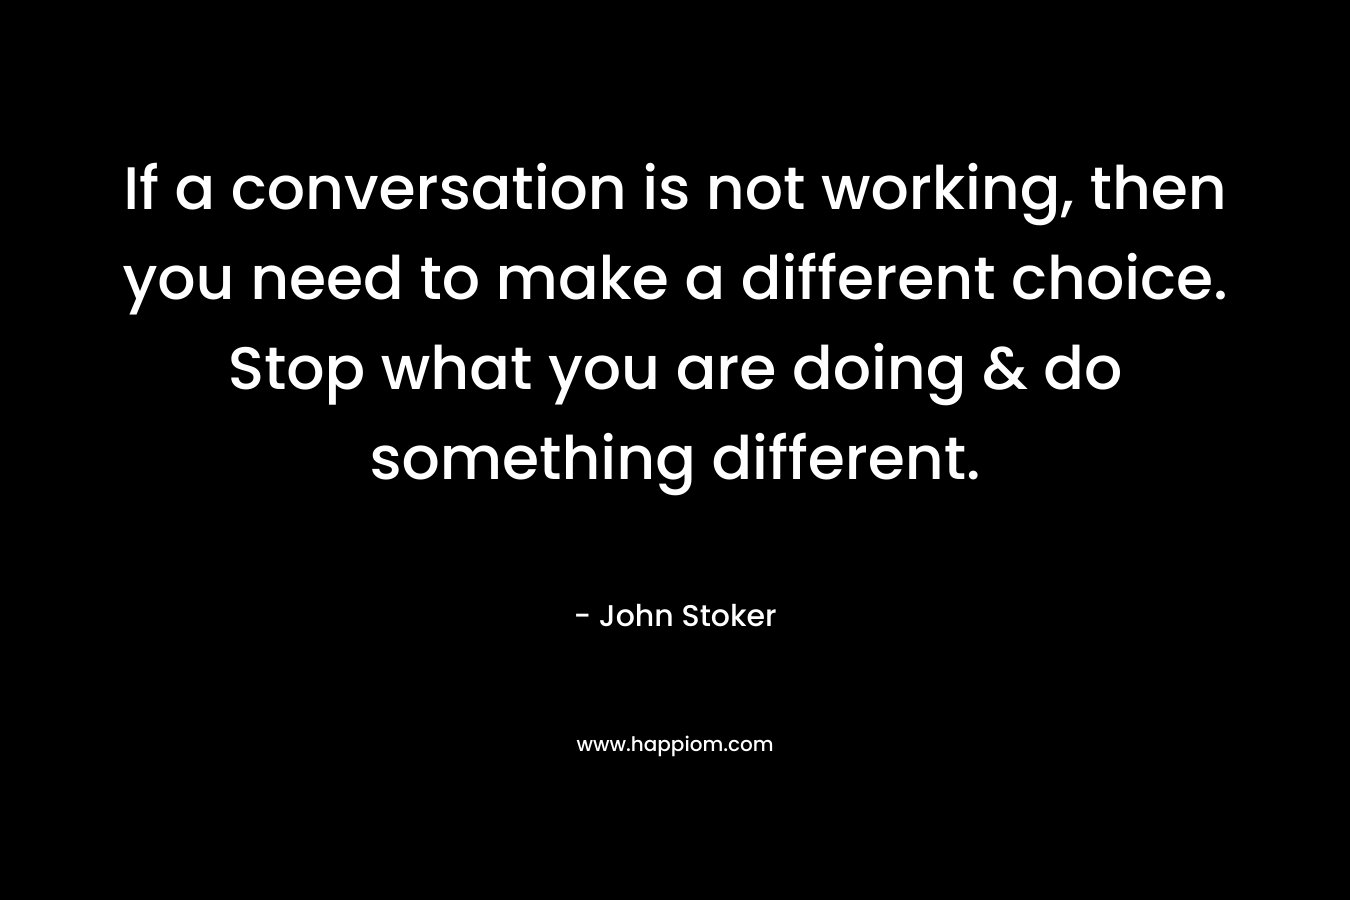 If a conversation is not working, then you need to make a different choice. Stop what you are doing & do something different. – John Stoker